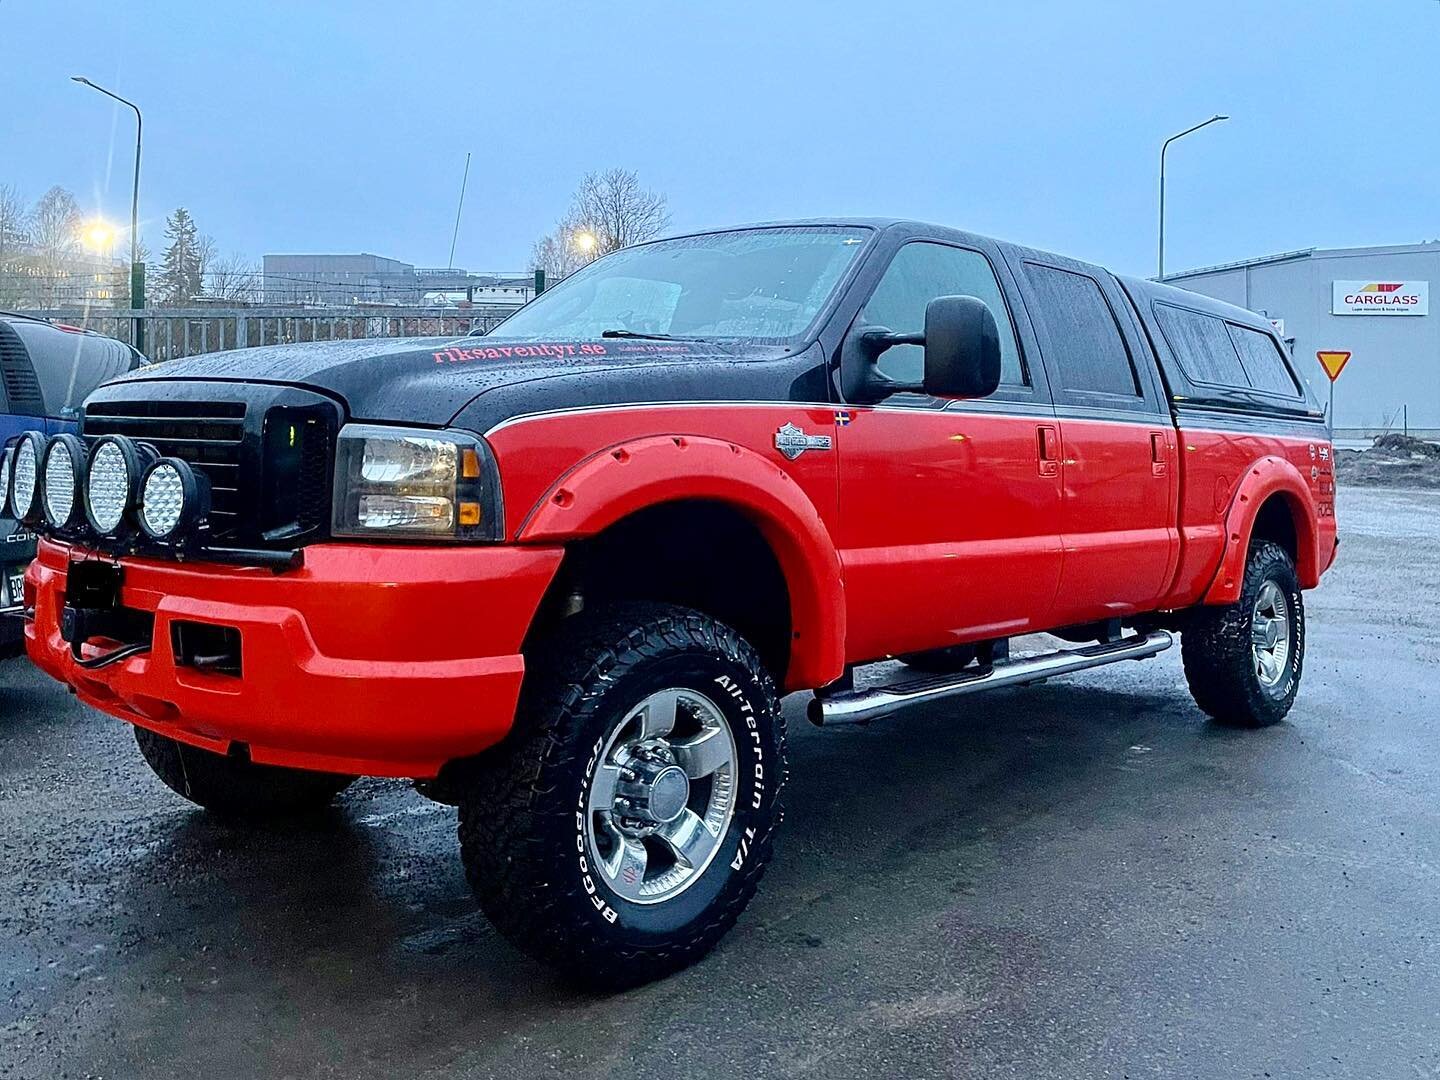 Ford Monster in the shop today!
#ford#fordpickup #fordf250 #f250 #forddieseltrucks #dieseltrucks #dieselpower #pickup #pickuplife#lifted #liftedtrucks